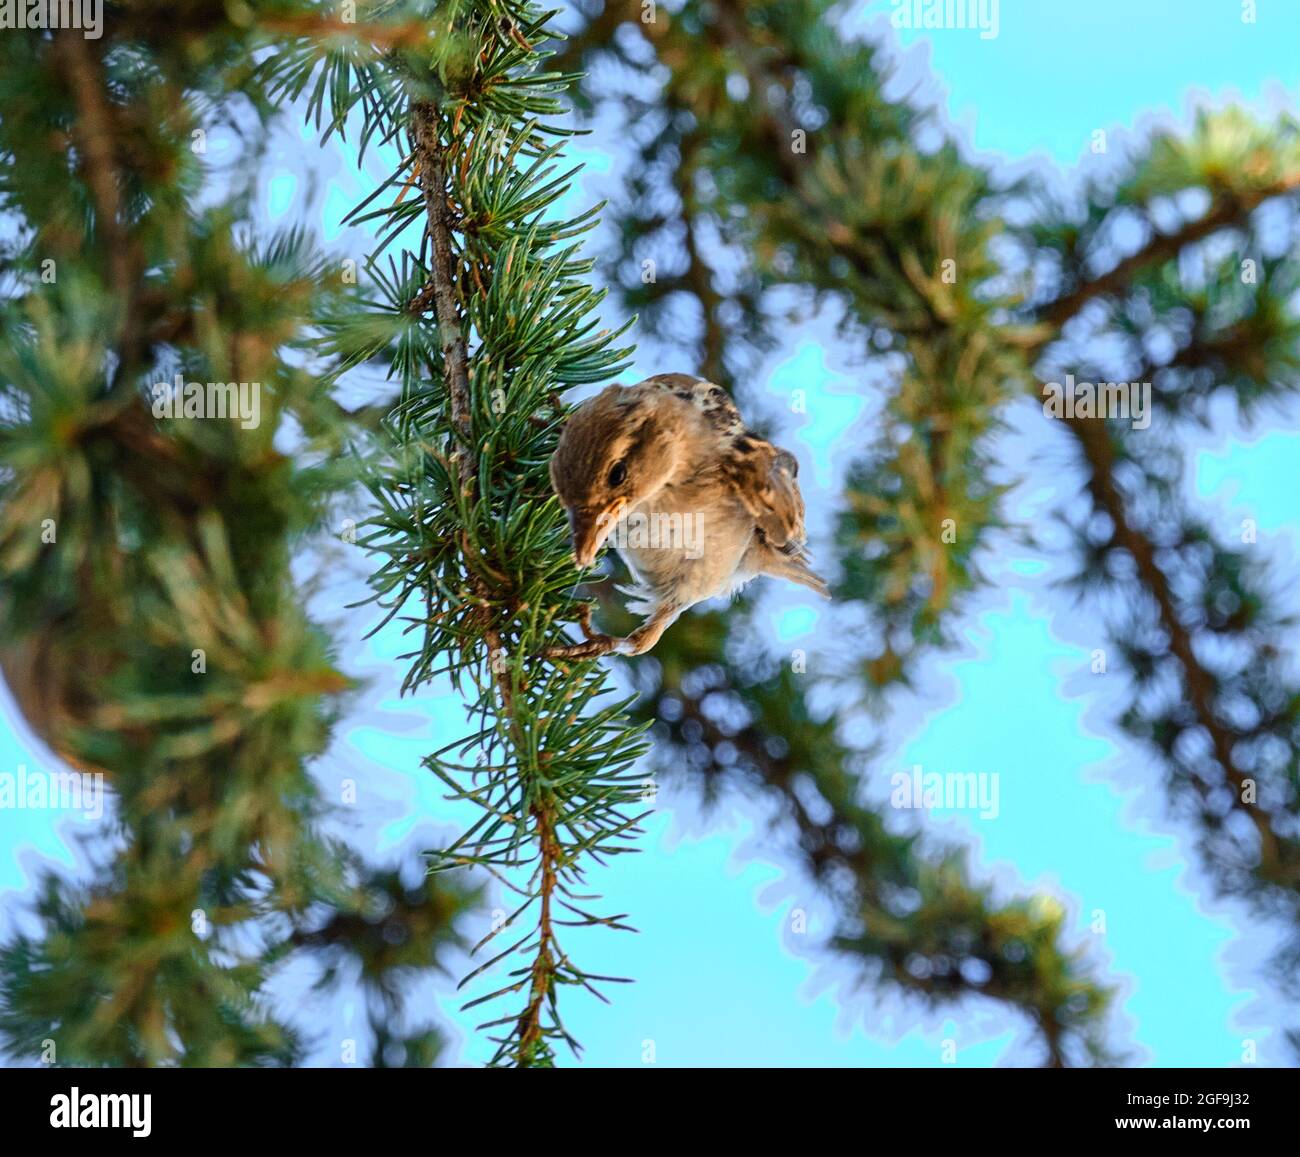 Closeup shot of a house sparrow hanging from a tree branch under a bright sky Stock Photo